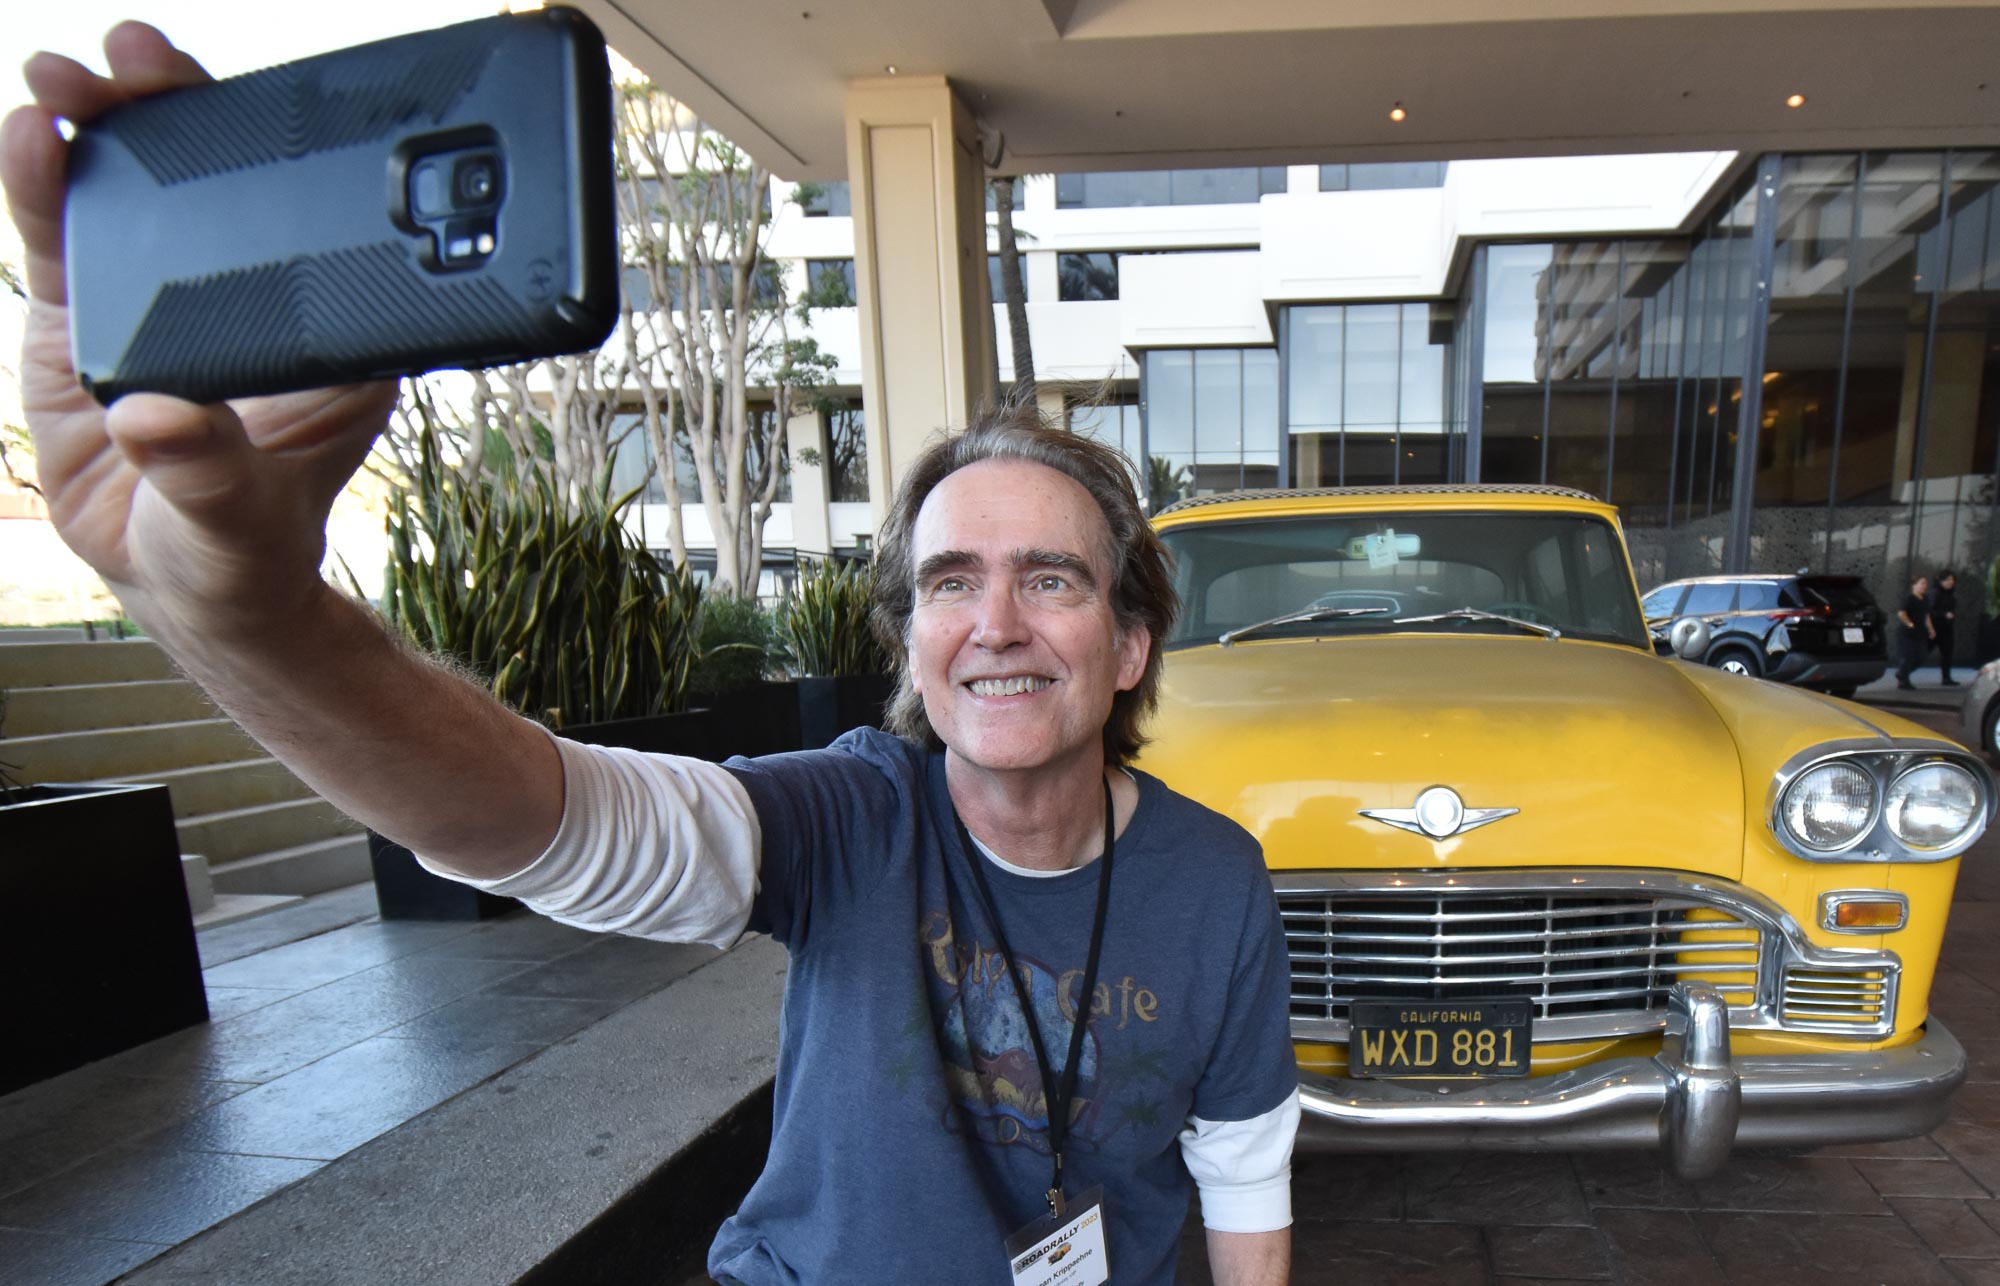 Legendary TAXI member, Dean Krippaehne thinks our cab is so pretty that he grabbed a selfie with her.